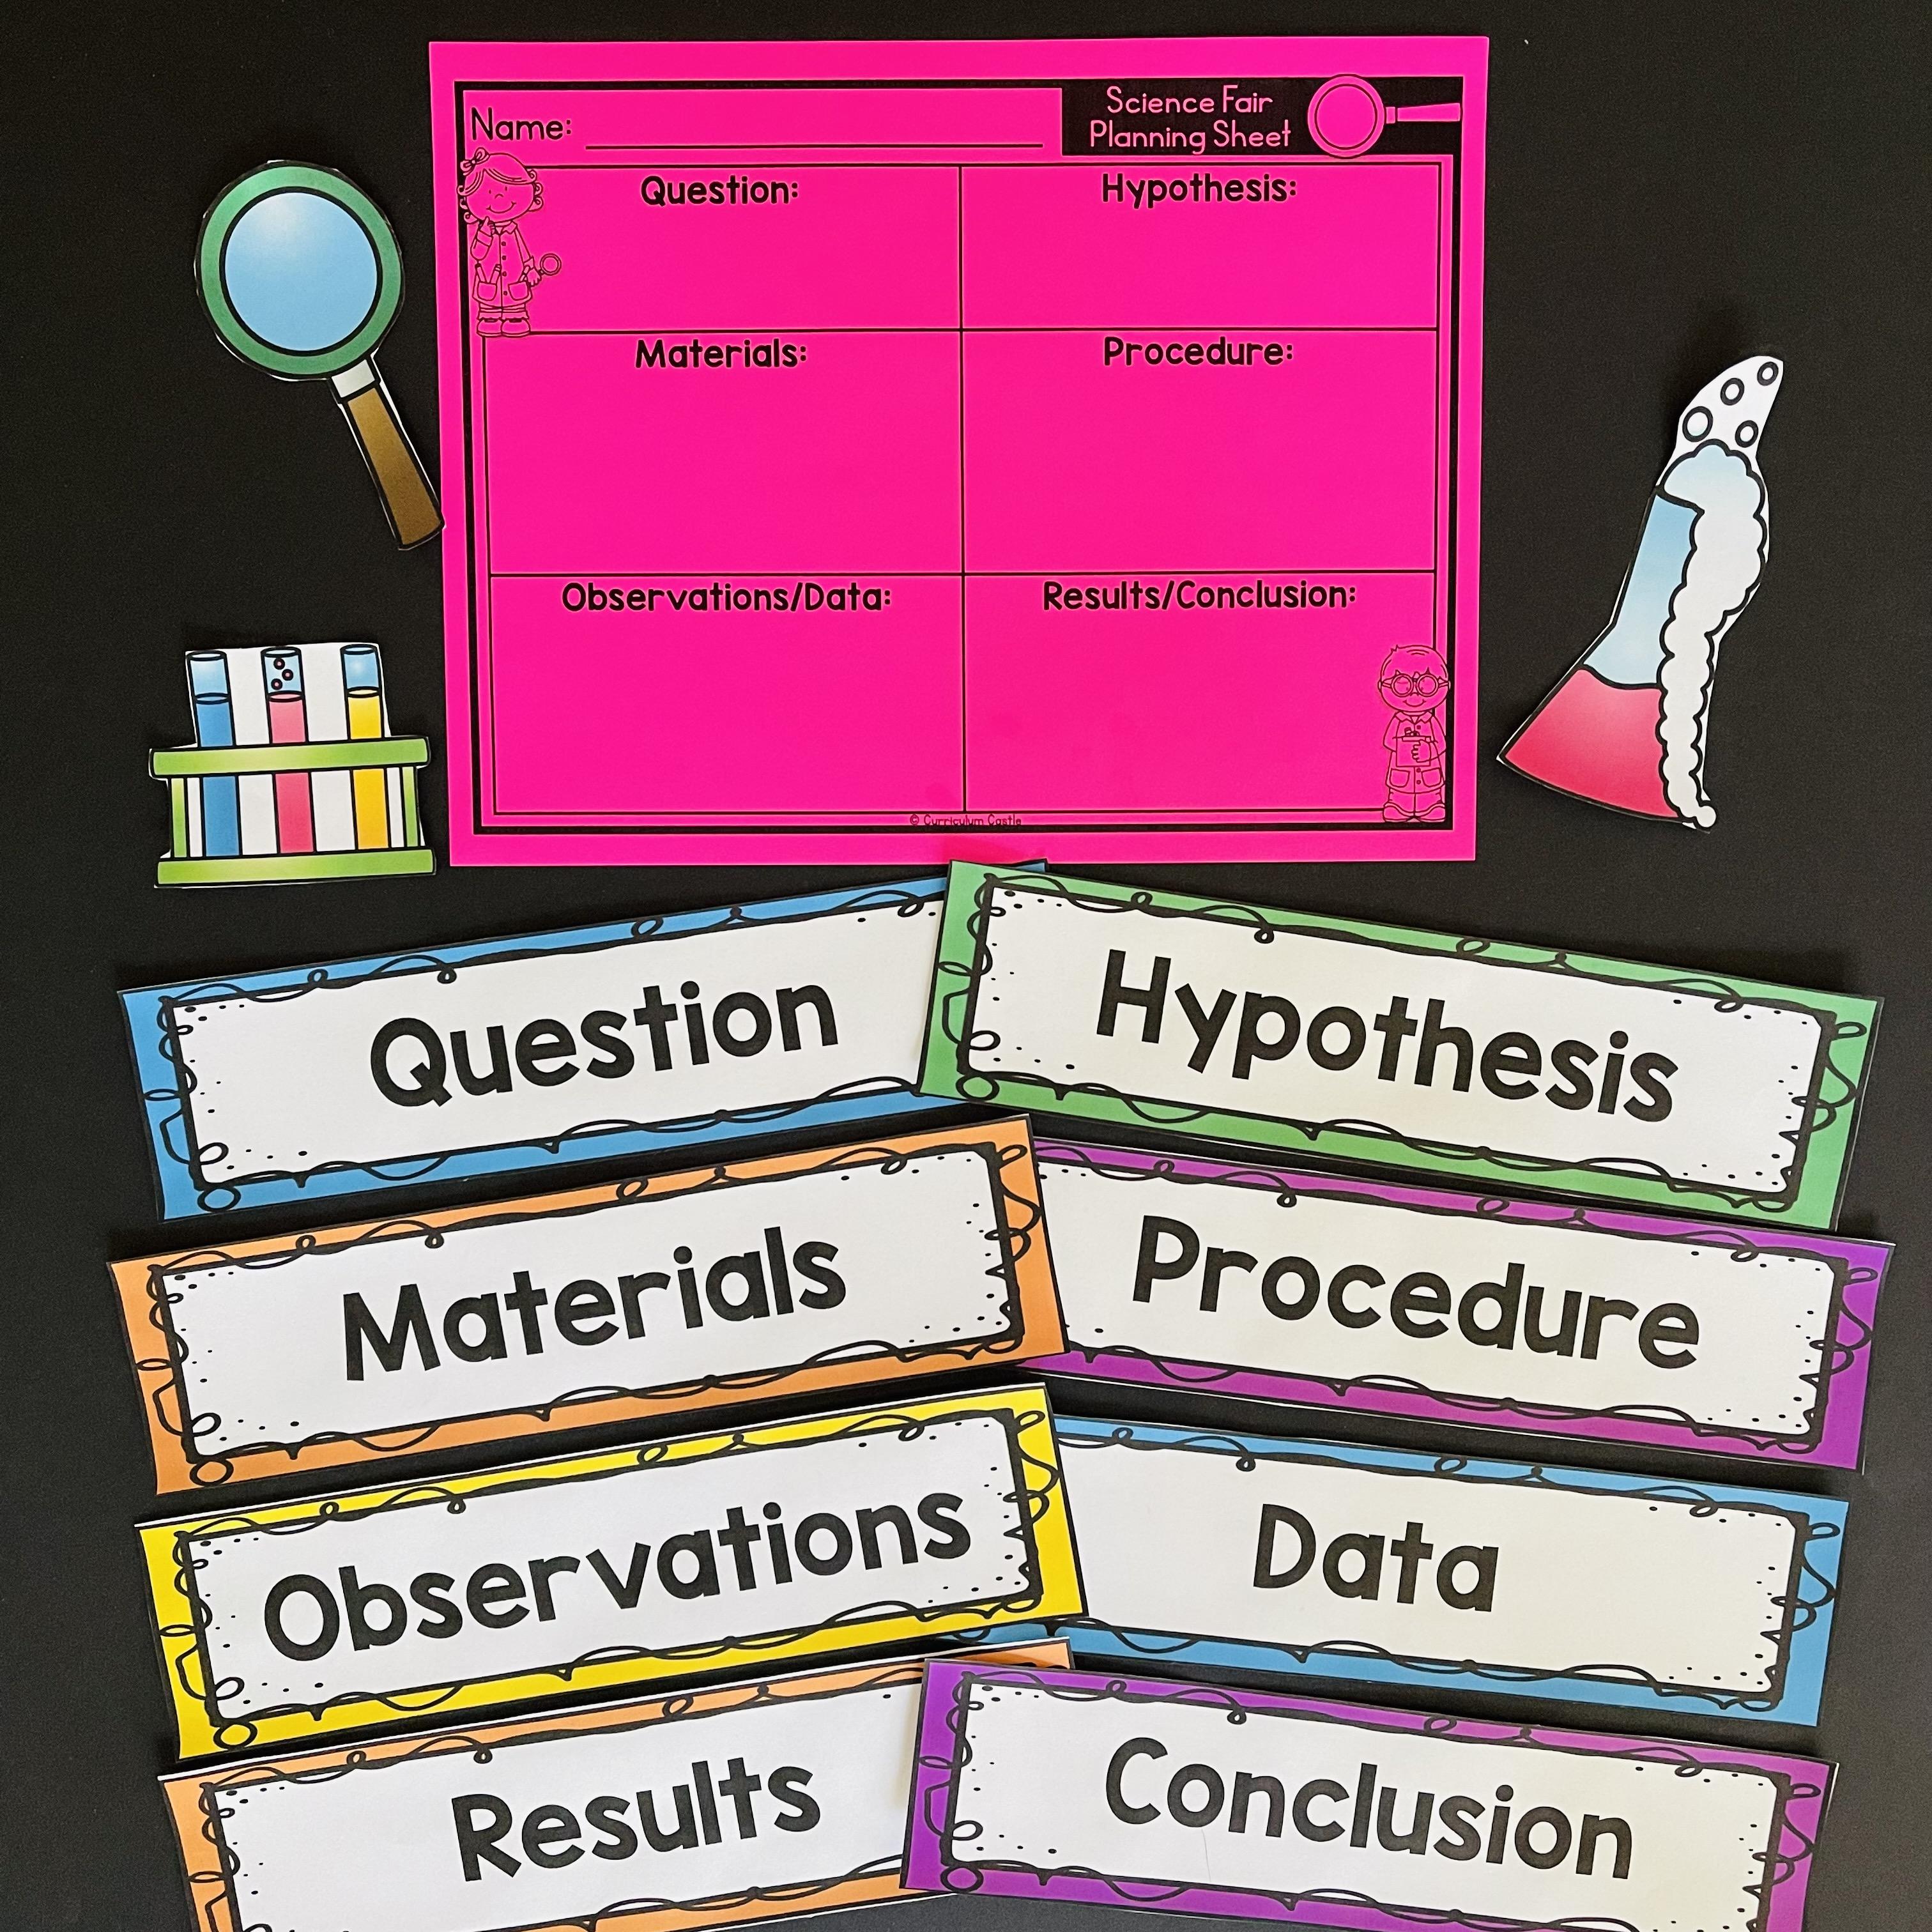 hypothesis examples for kids